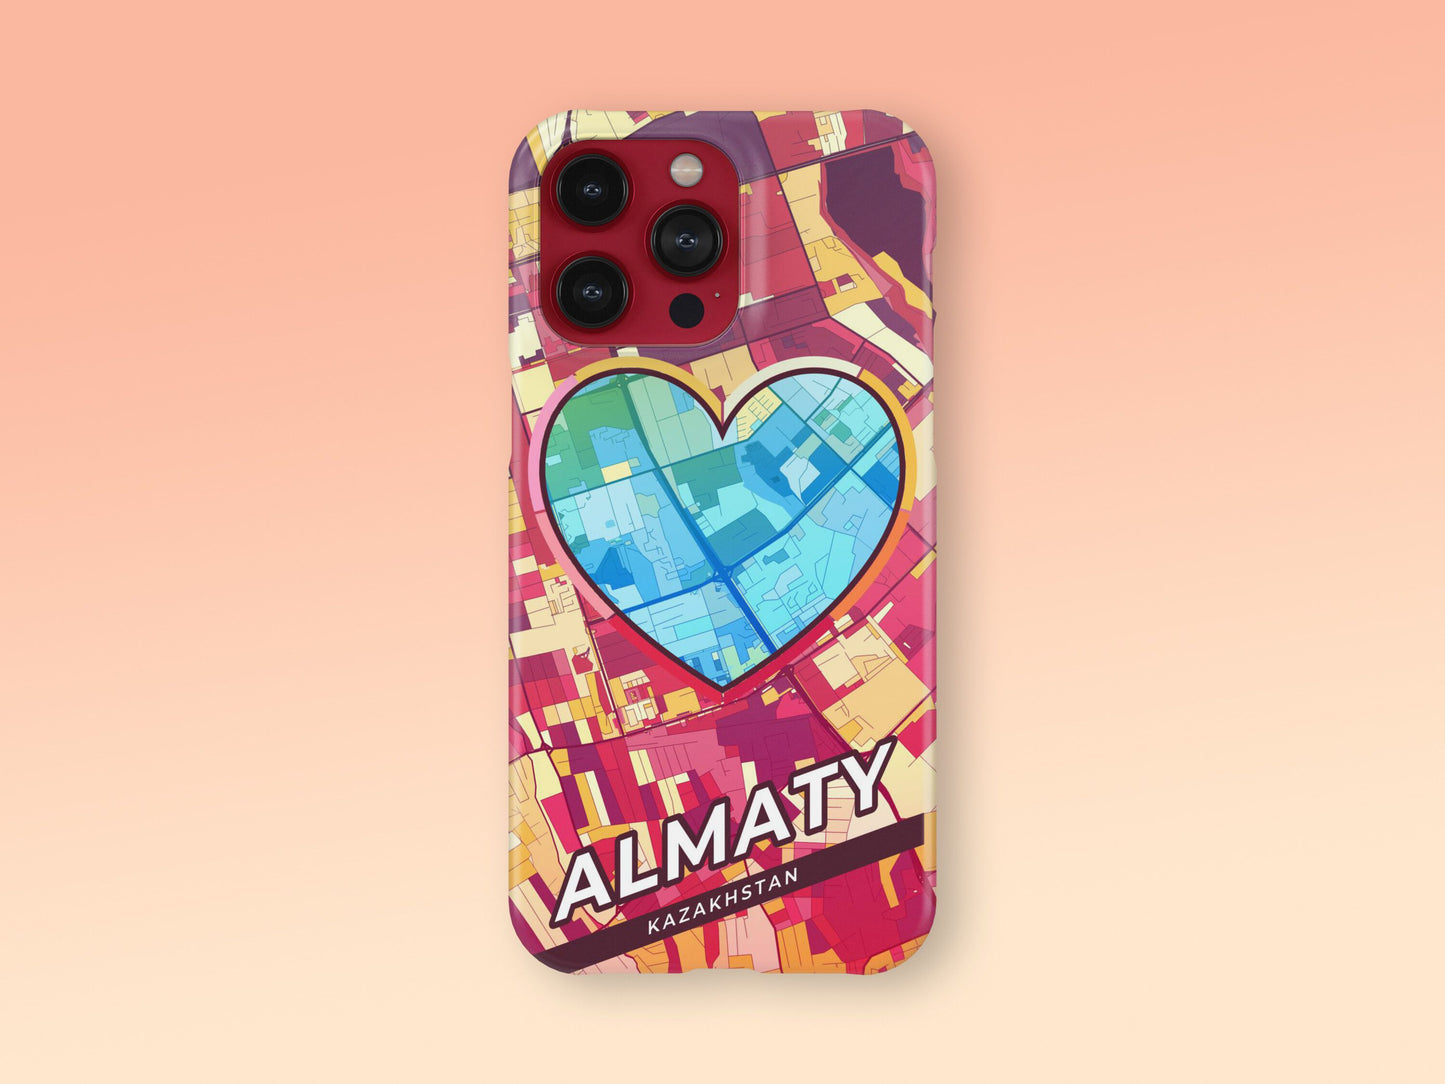 Almaty Kazakhstan slim phone case with colorful icon. Birthday, wedding or housewarming gift. Couple match cases. 2